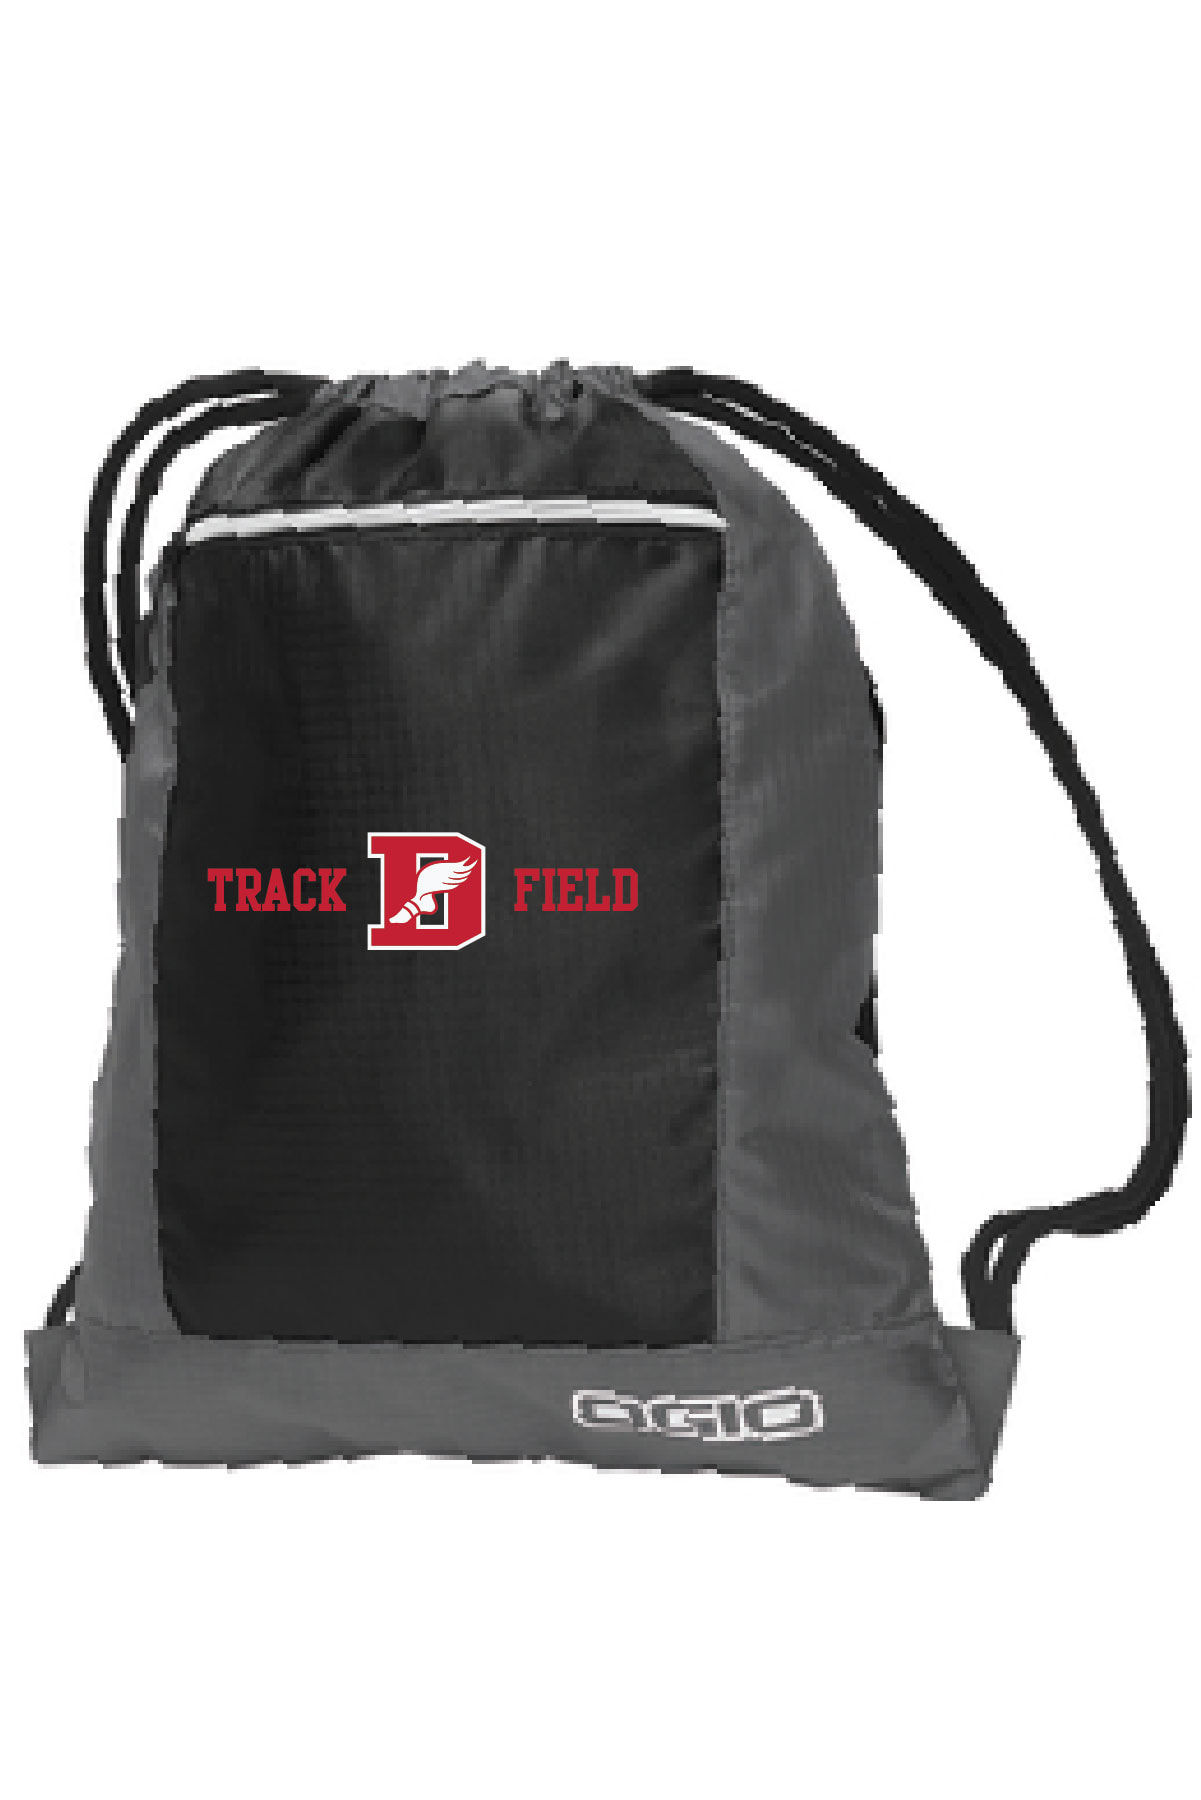 SUPPORT TRACK & FIELD: Drawstring Cinch Bag w/ Embroidered Logo